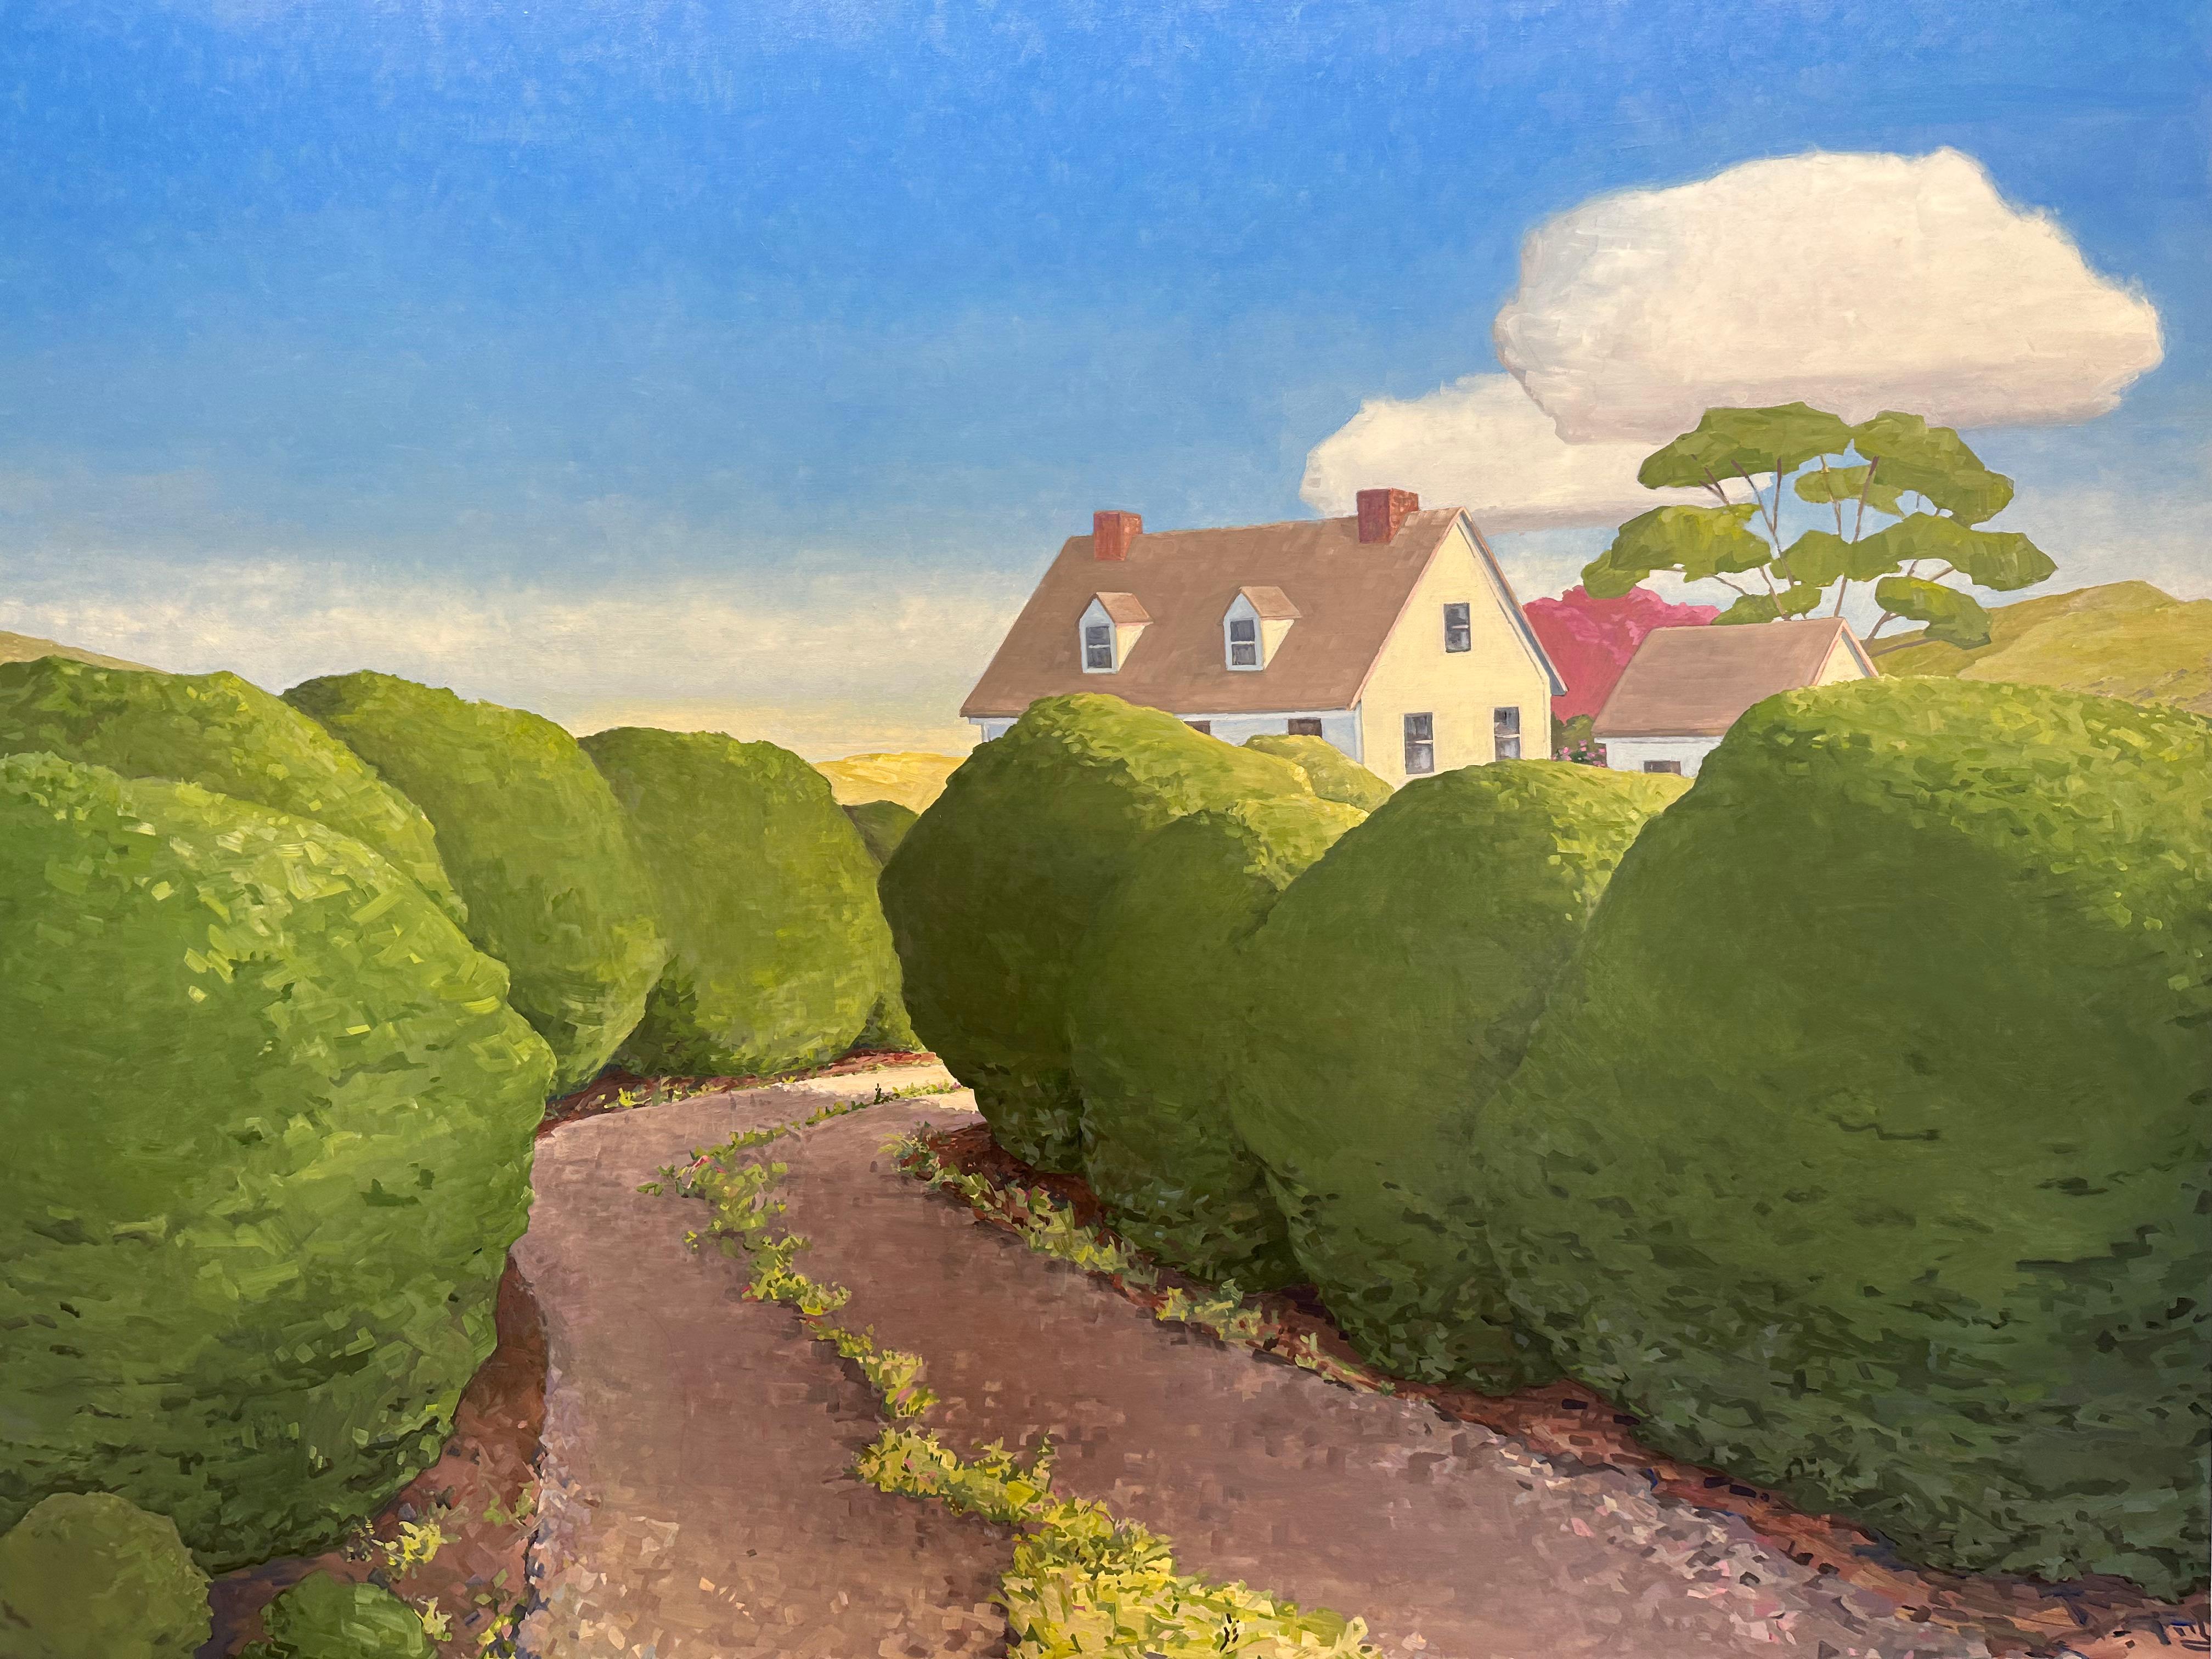 Invitation, White House Roof, Blue Sky, Clouds, Green Hedges, Pathway - Contemporary Painting by KK Kozik